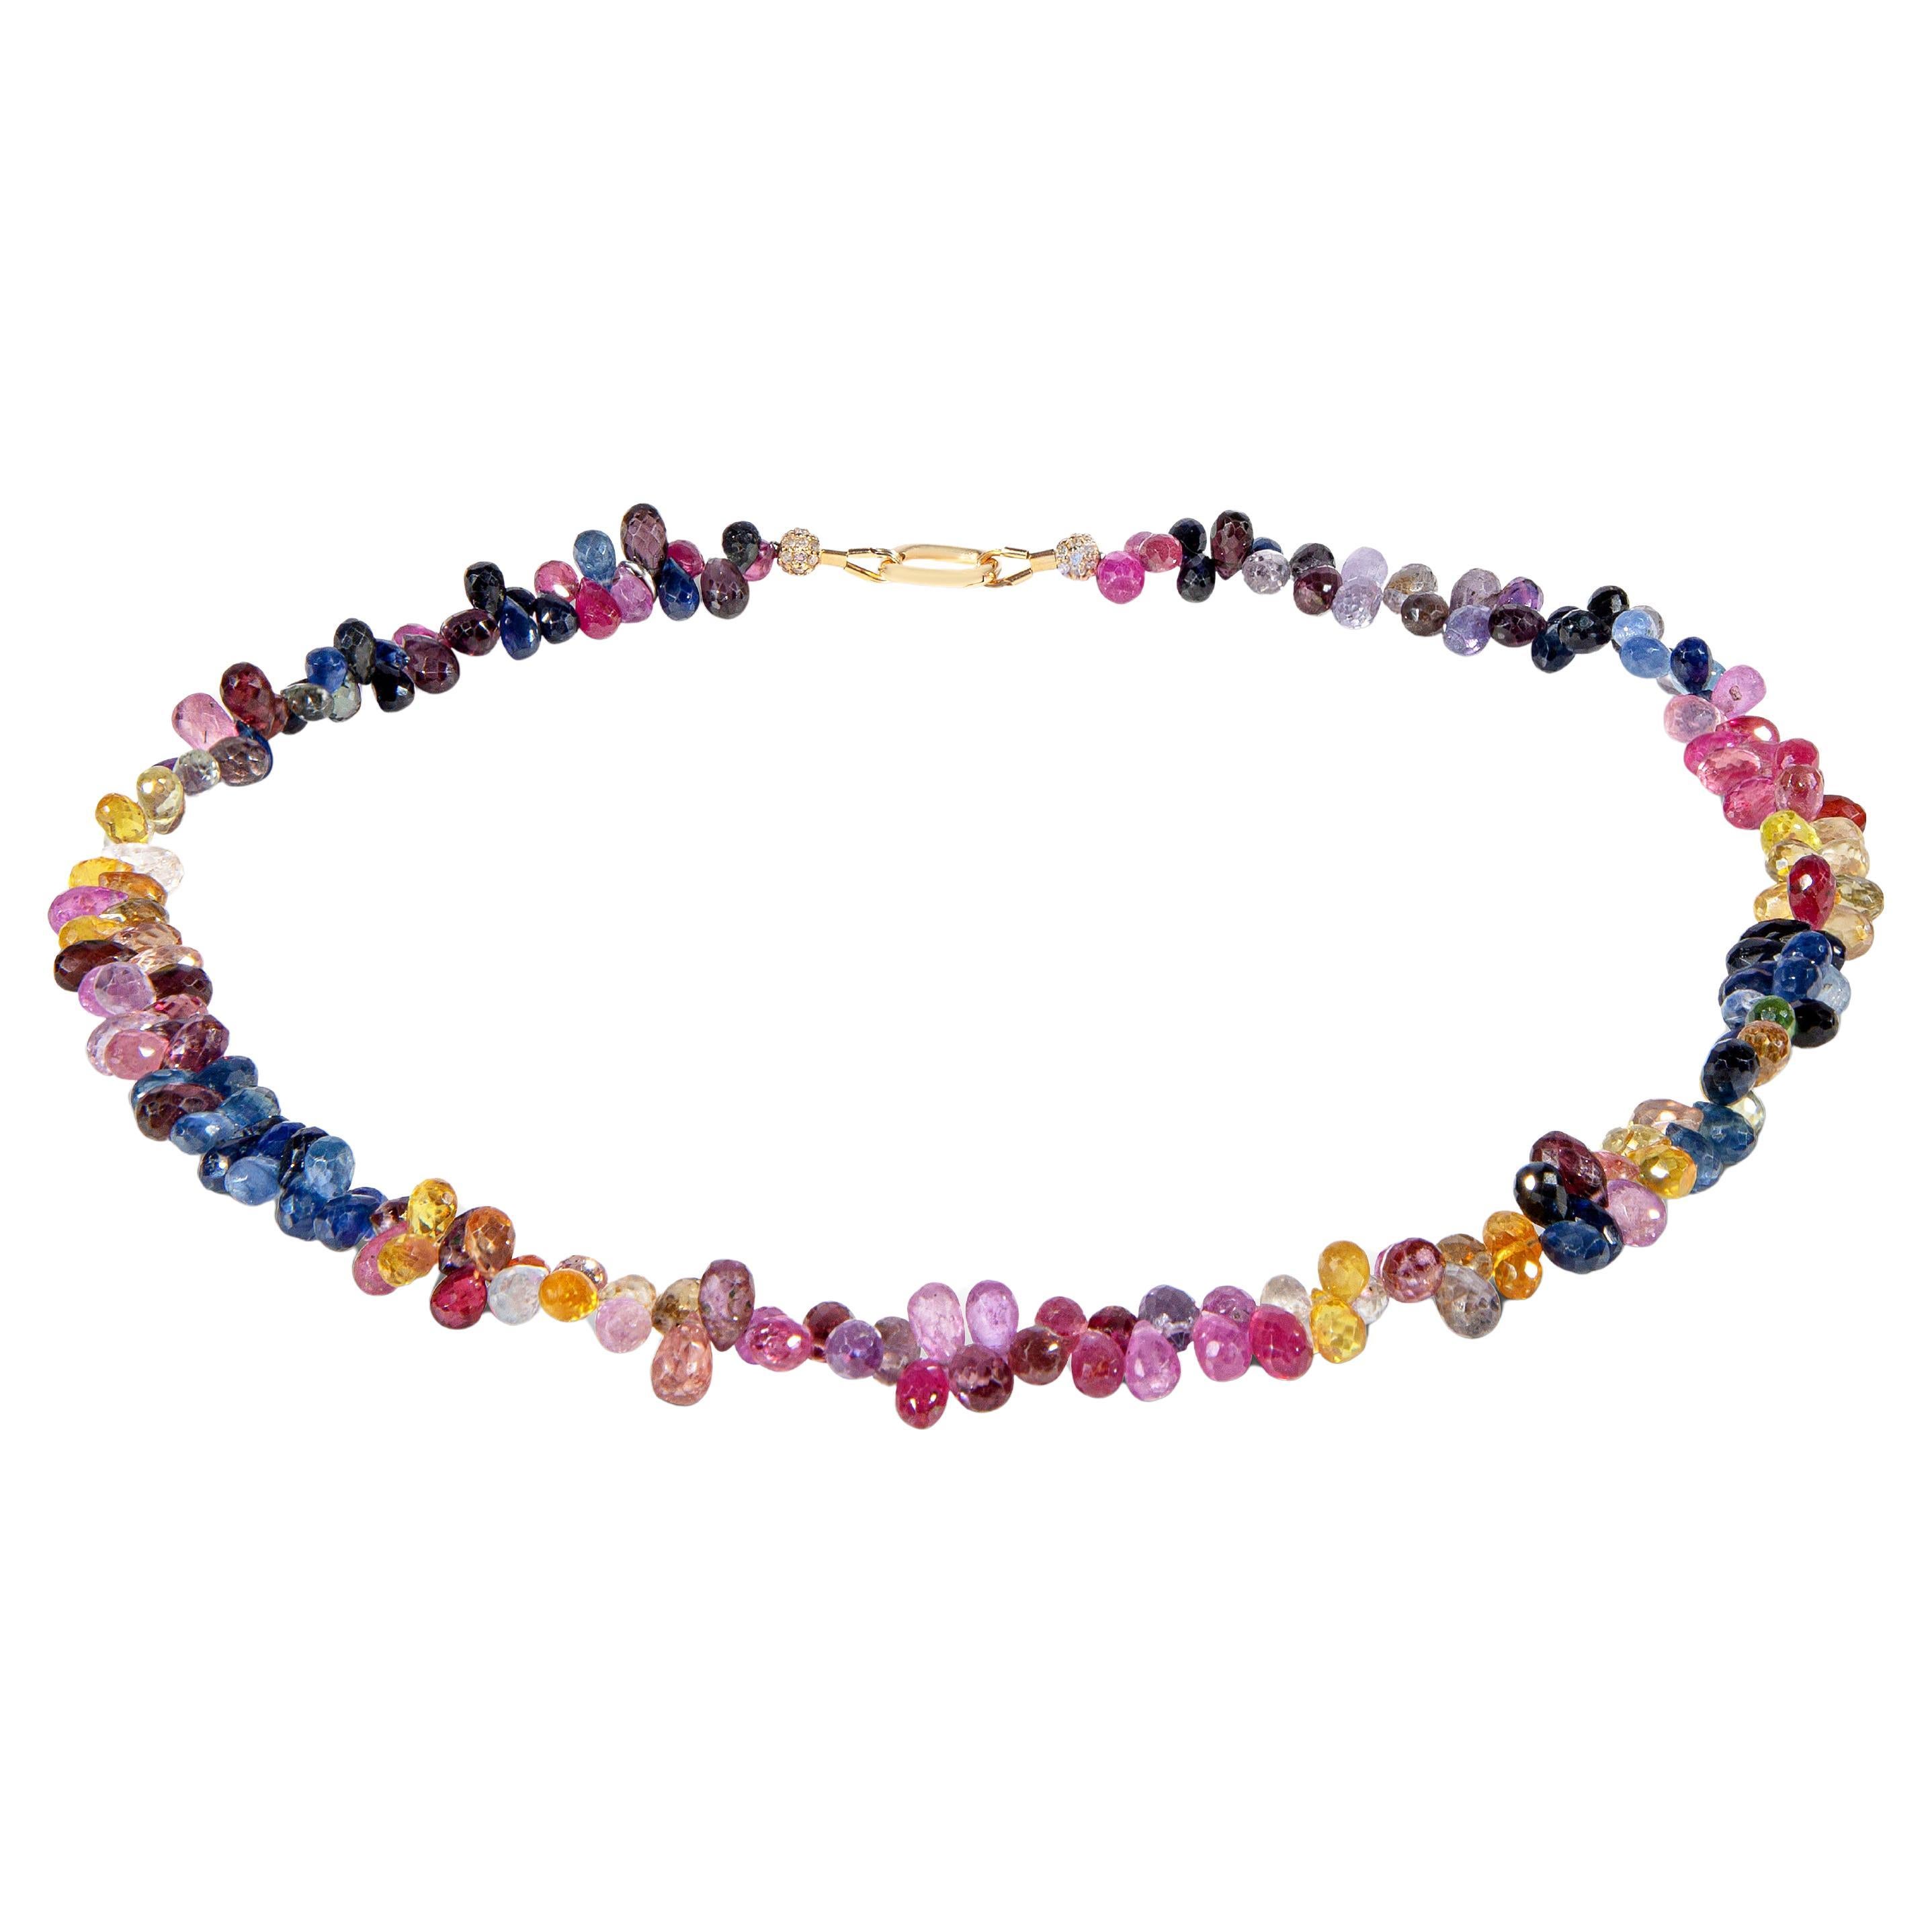 Approx. 170 carat multi color sapphire briolet necklace with 14K gold closure